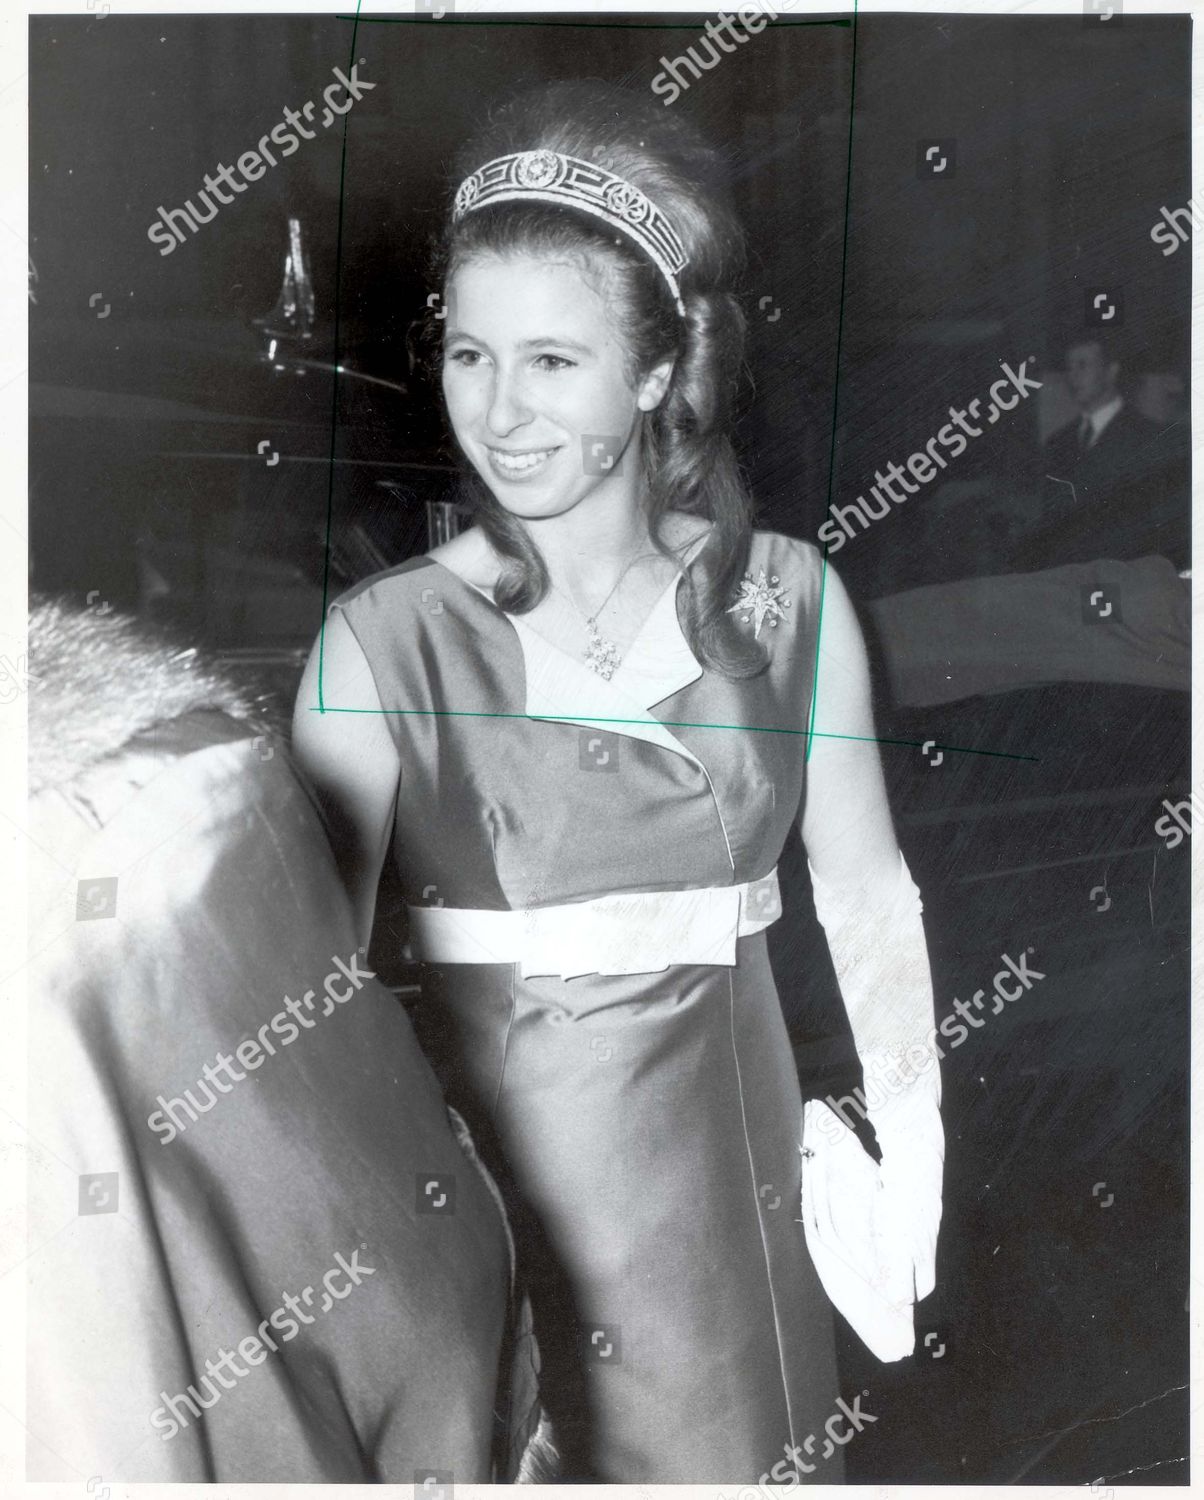 princess-anne-now-princess-royal-1970-picture-shows-princess-anne-weaing-a-full-length-green-dress-for-the-bicentenary-banquet-of-the-spode-porcelain-company-at-goldsmiths-hall-in-the-city-of-london-shutterstock-editorial-892383a.jpg